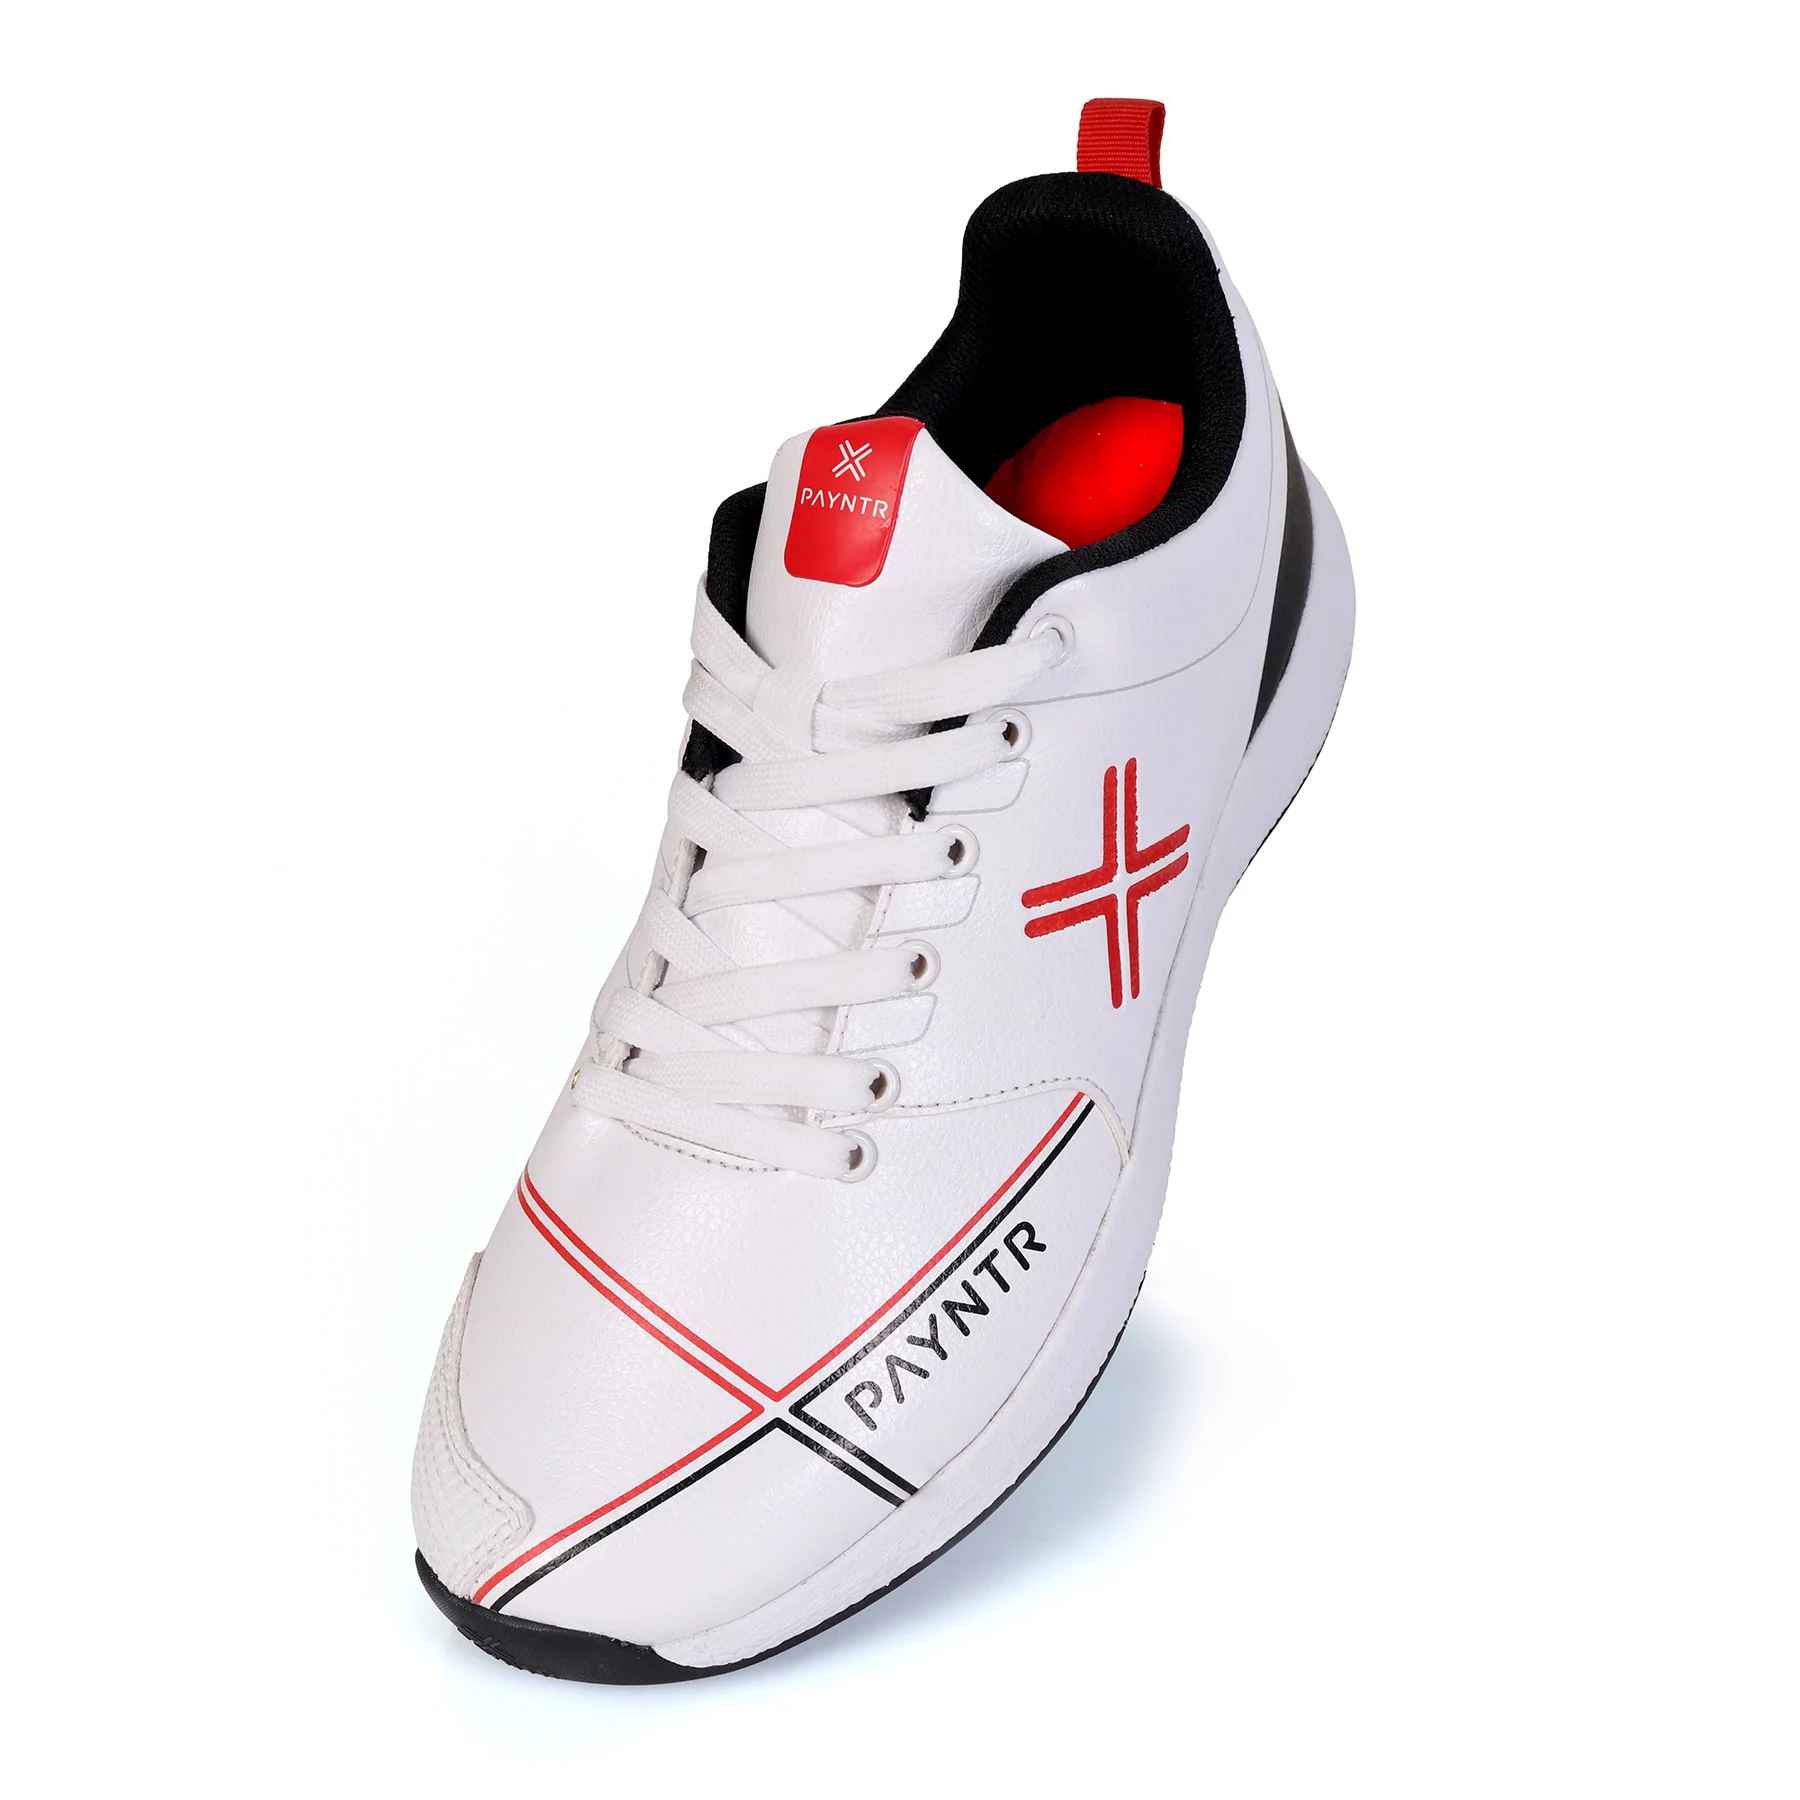 PAYNTR X RUBBER Cricket Shoes – White/Black/Red